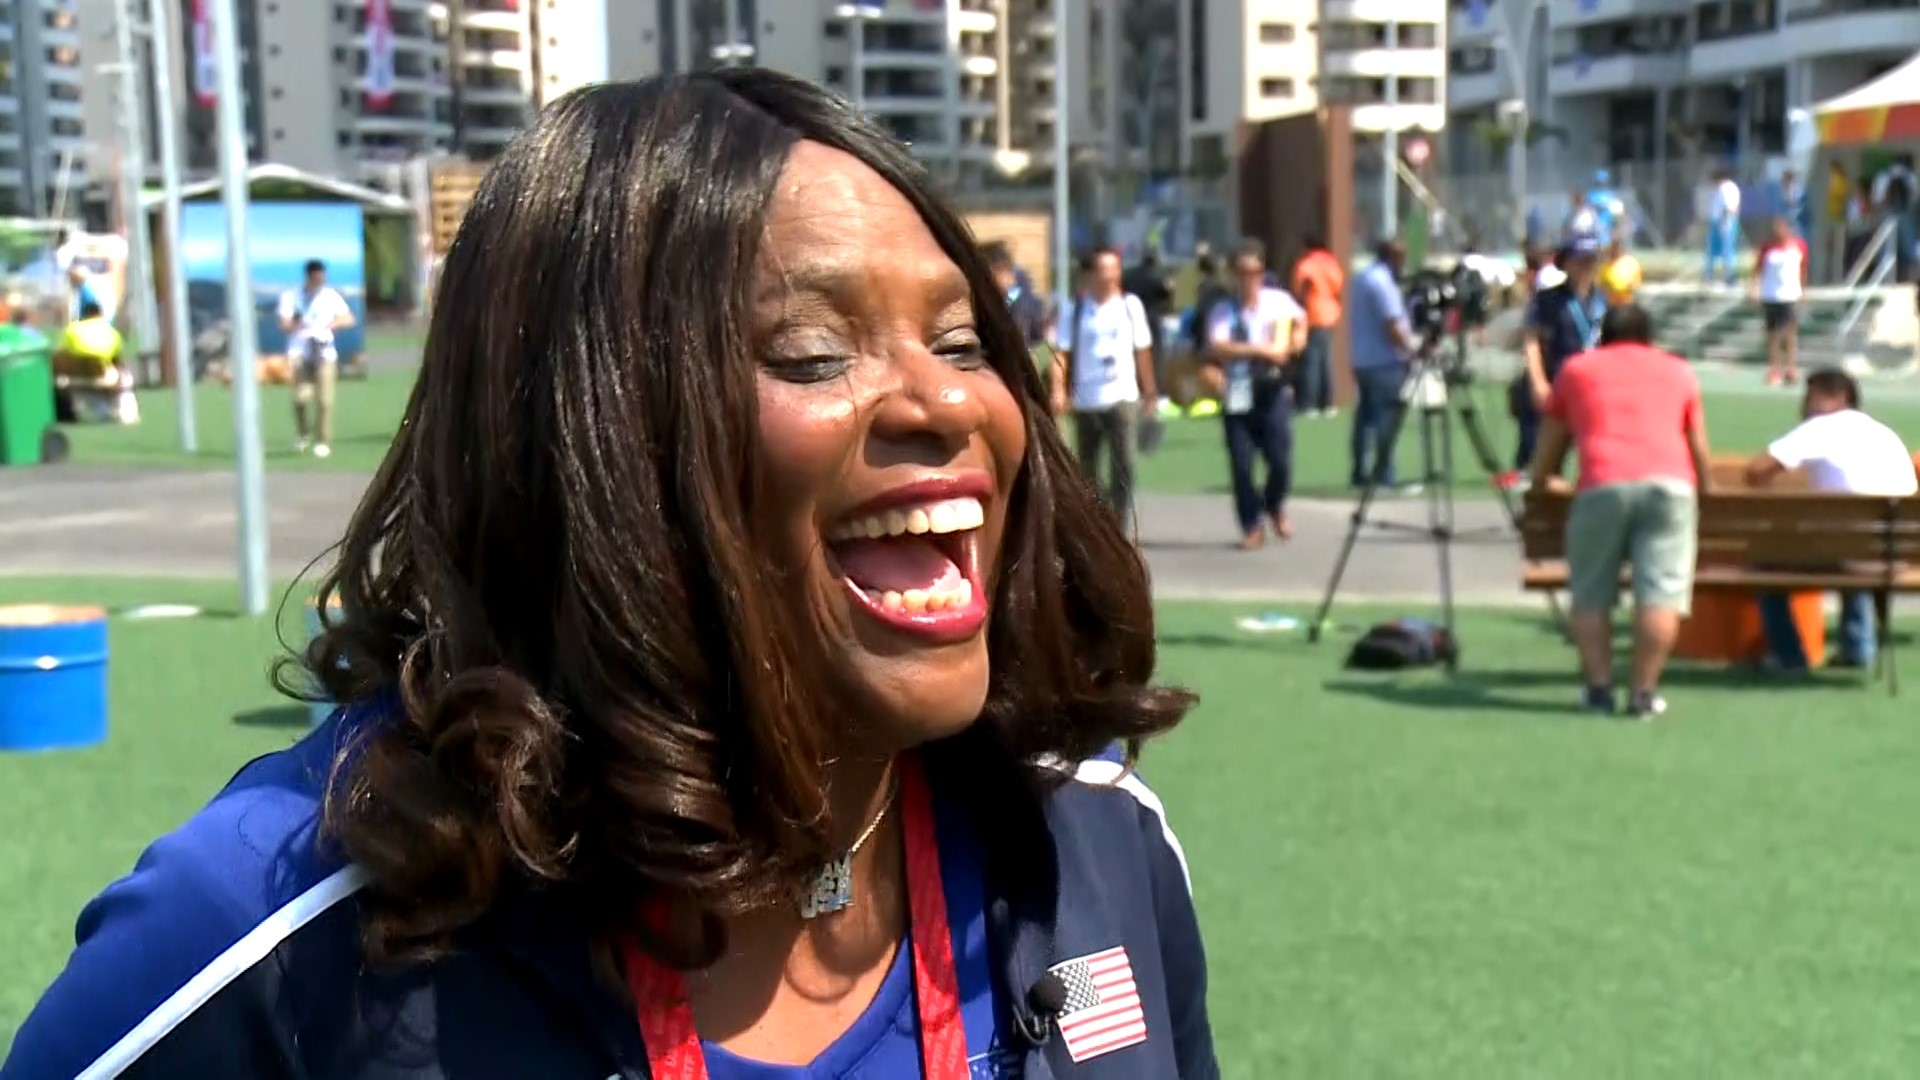 Aired Aug. 19, 2016: Sharrieffa was the event manager, she's an Olympian, and she's also an East Tennessean.